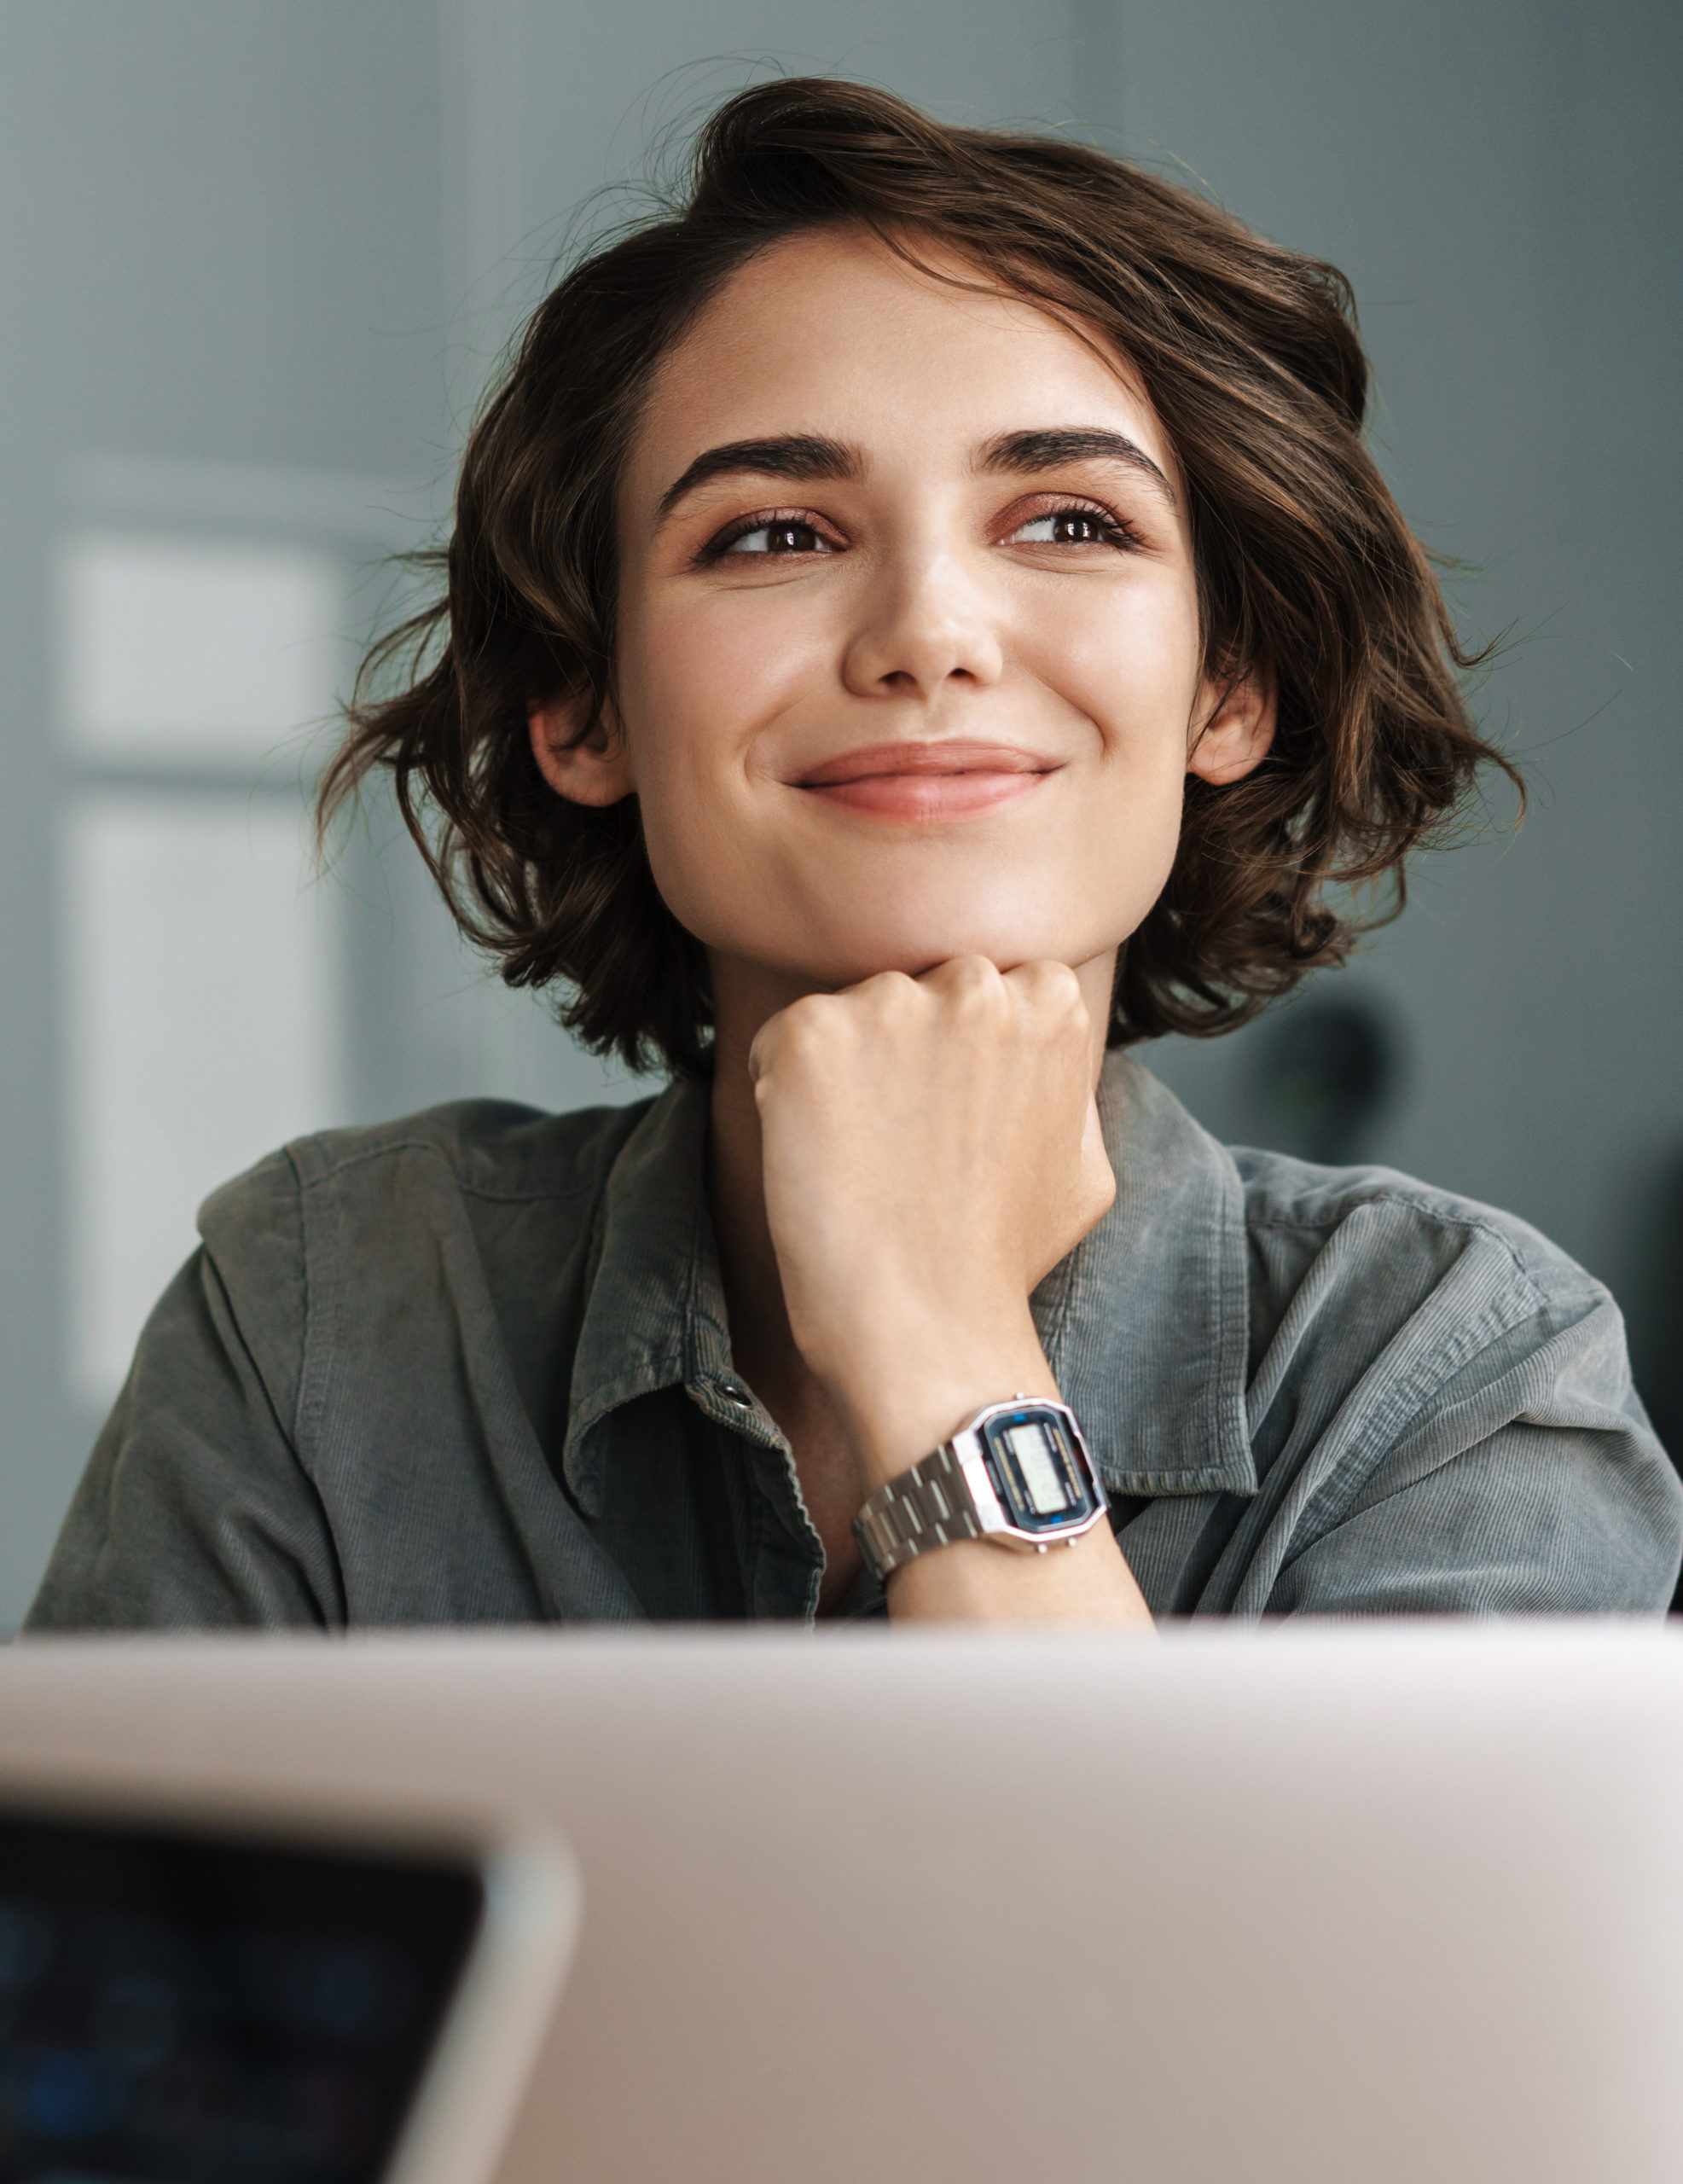 Female smiling in front of computer